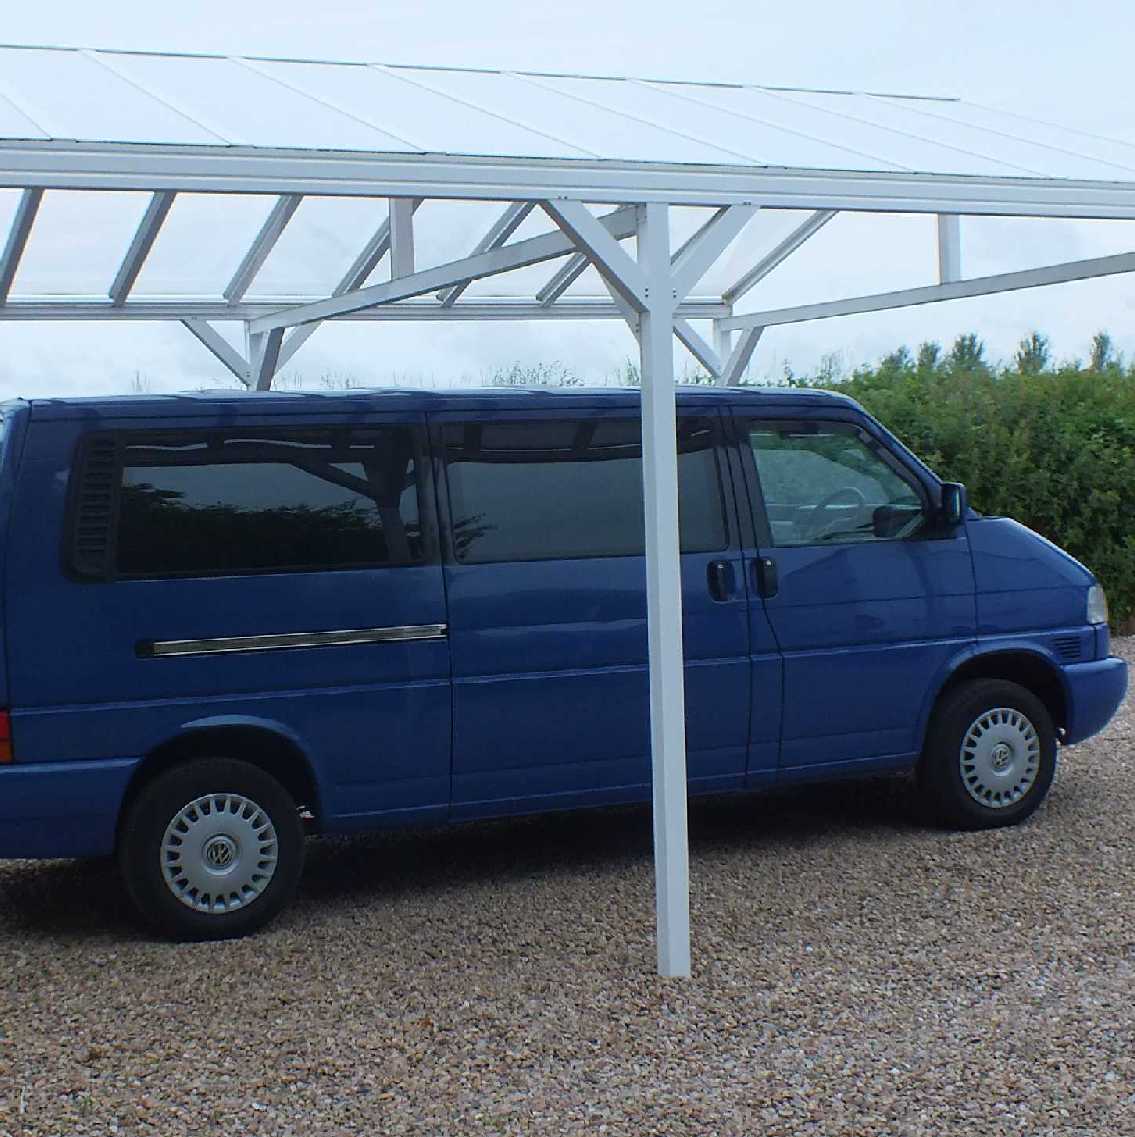 Great deals on Omega Smart Free-Standing, White Gable-Roof (type 1) Canopy with 16mm Polycarbonate Glazing - 7.4m (W) x 3.5m (P), (8) Supporting Posts